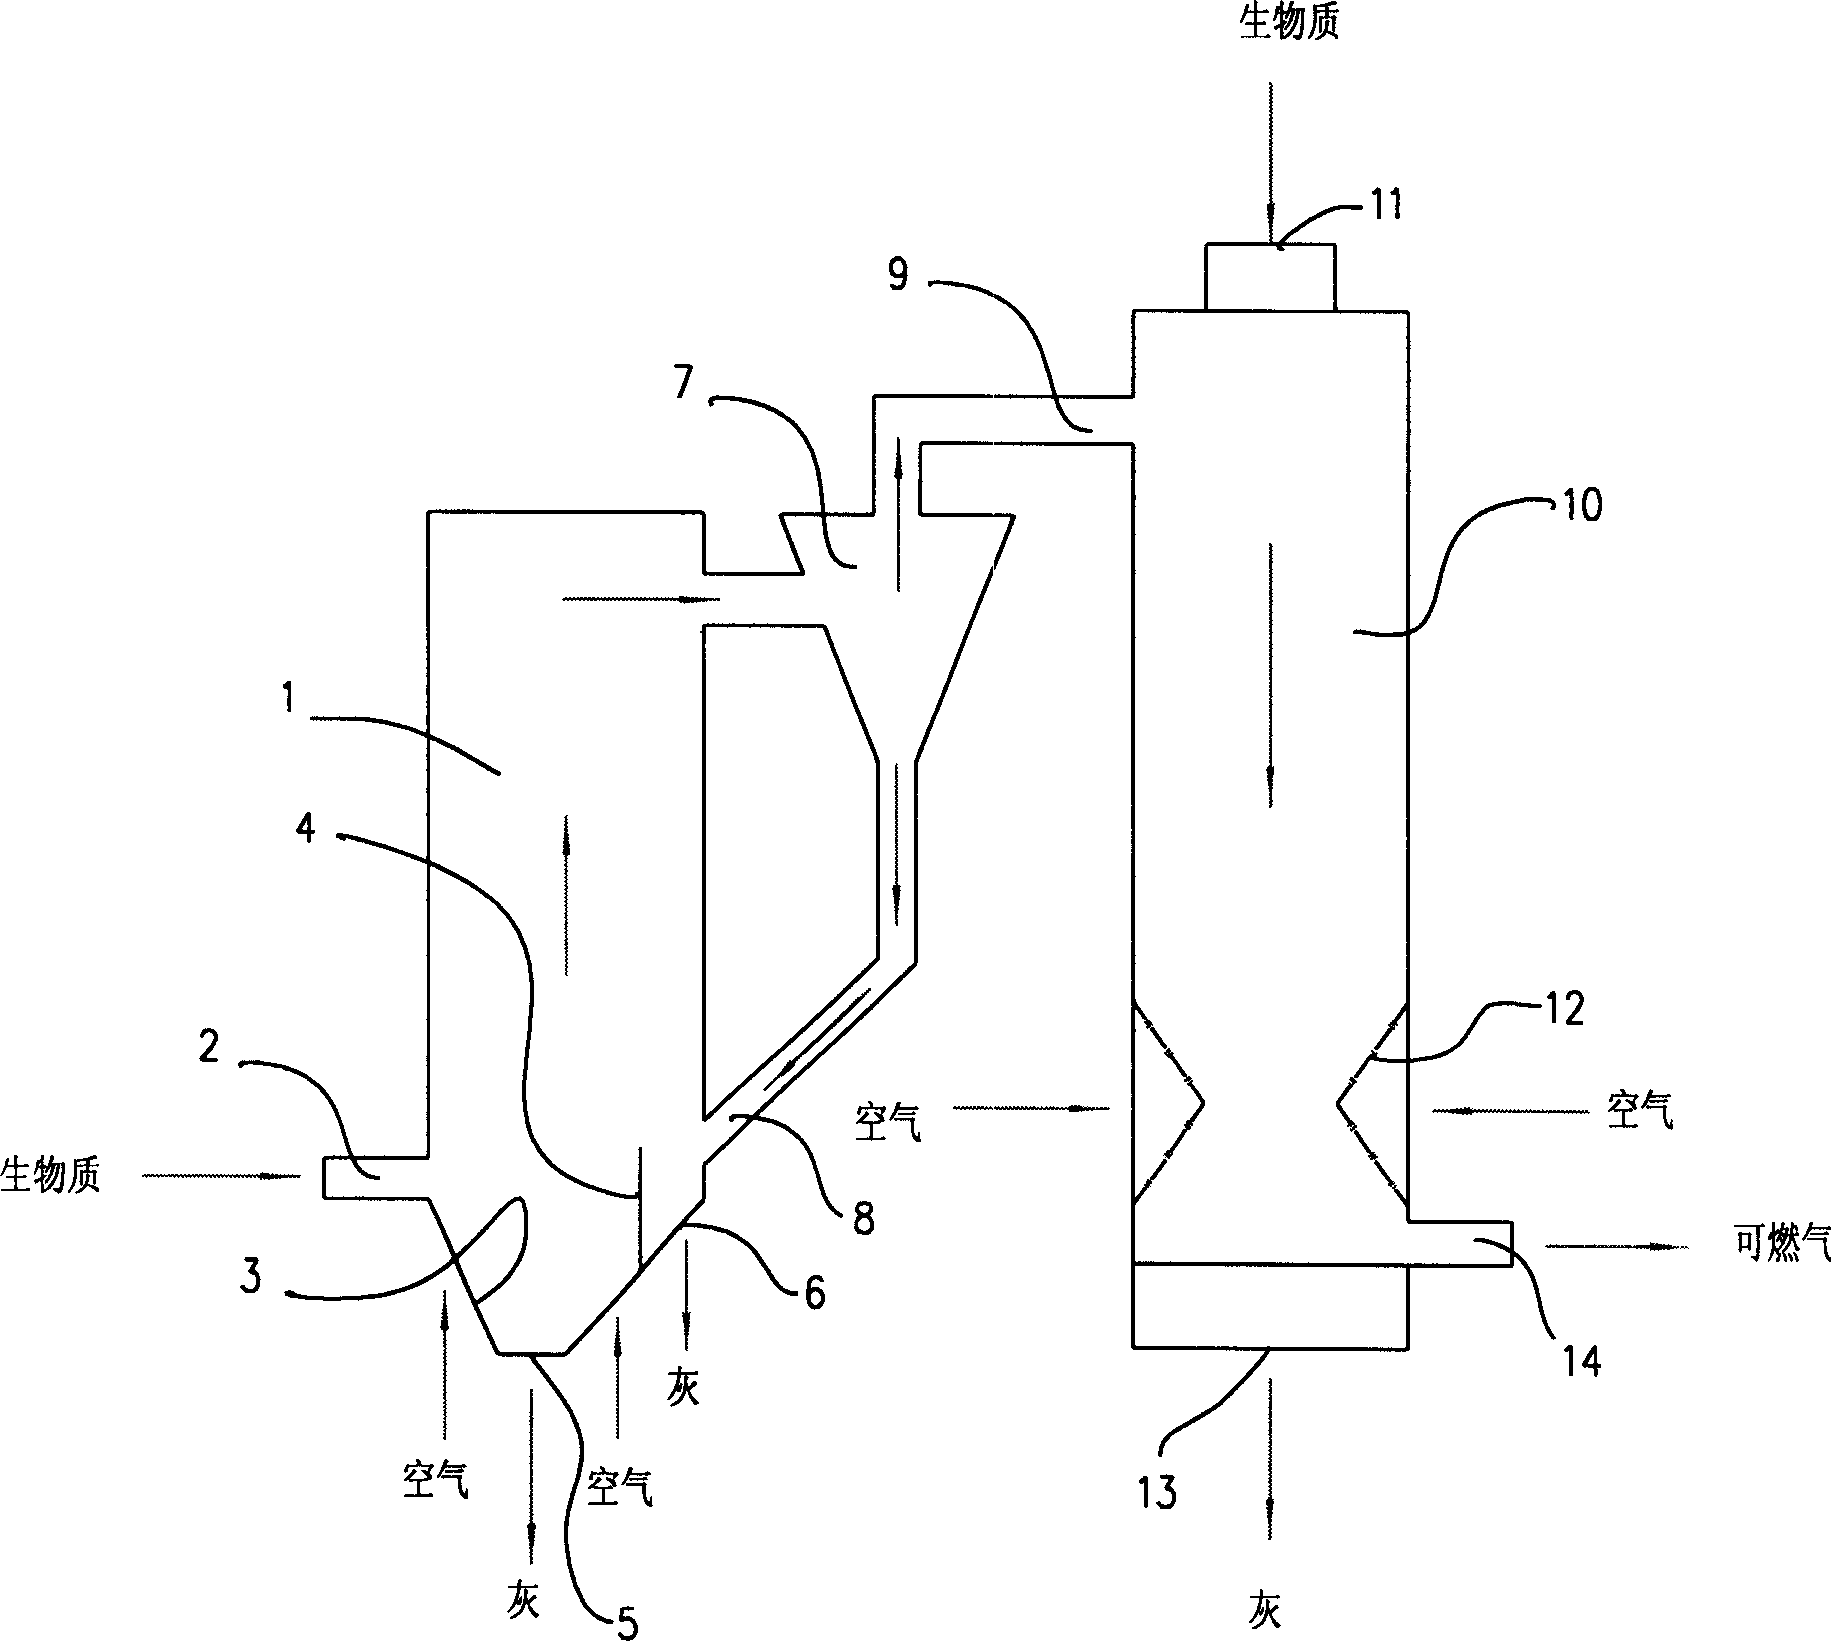 Biomass mixing and gasifying process and apparatus